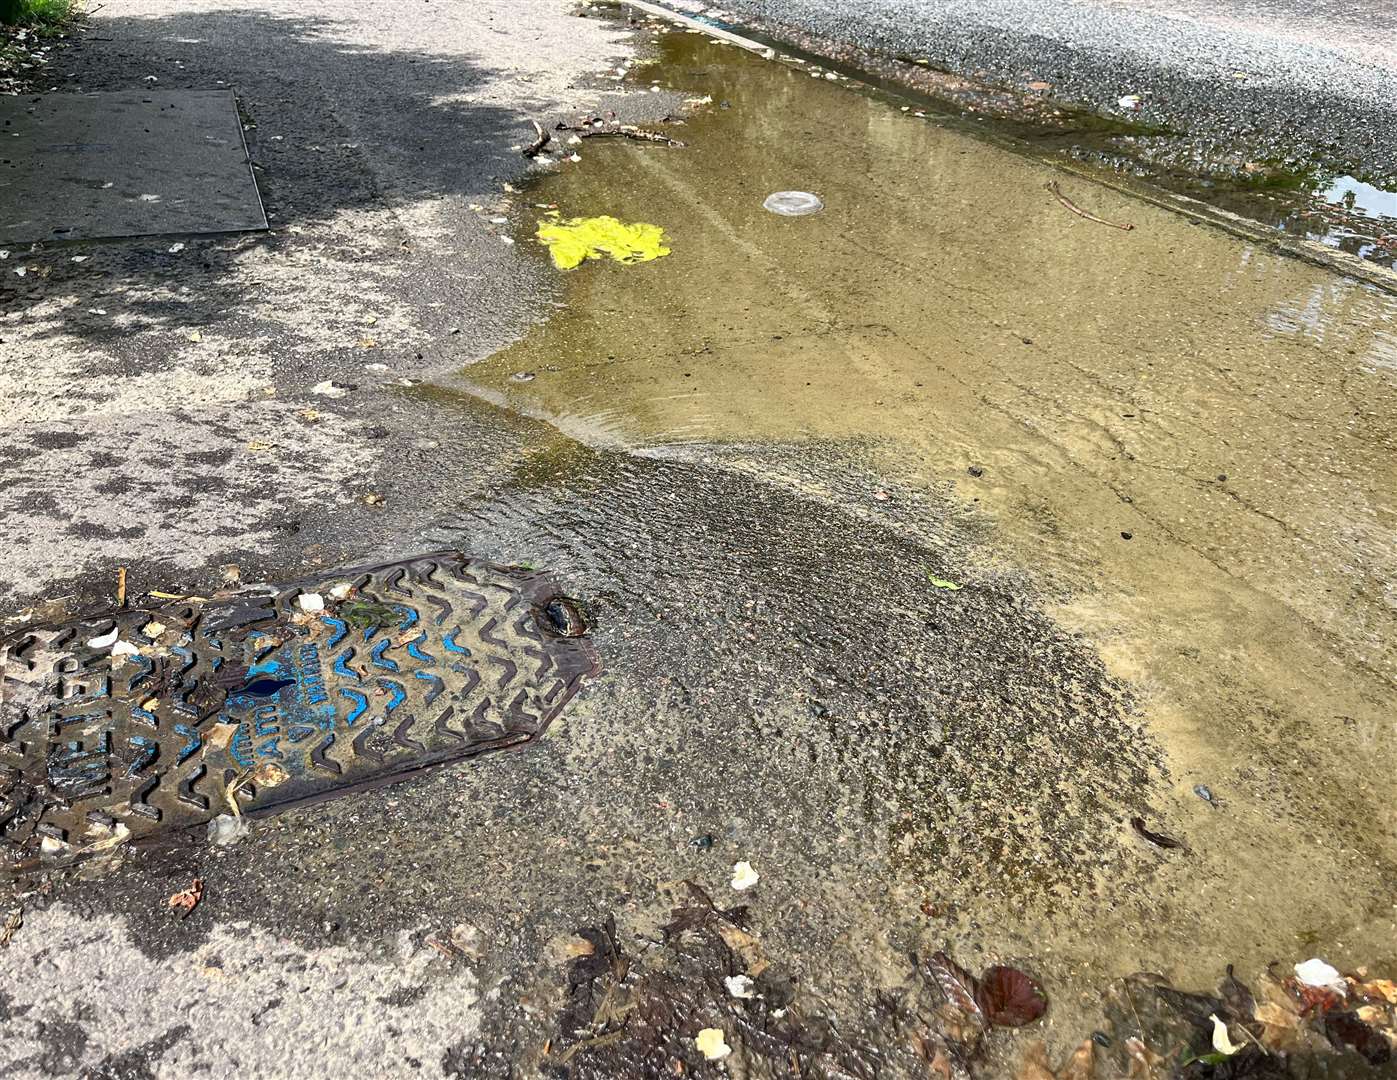 The leak covers part of the pavement and road in Cemetery Lane